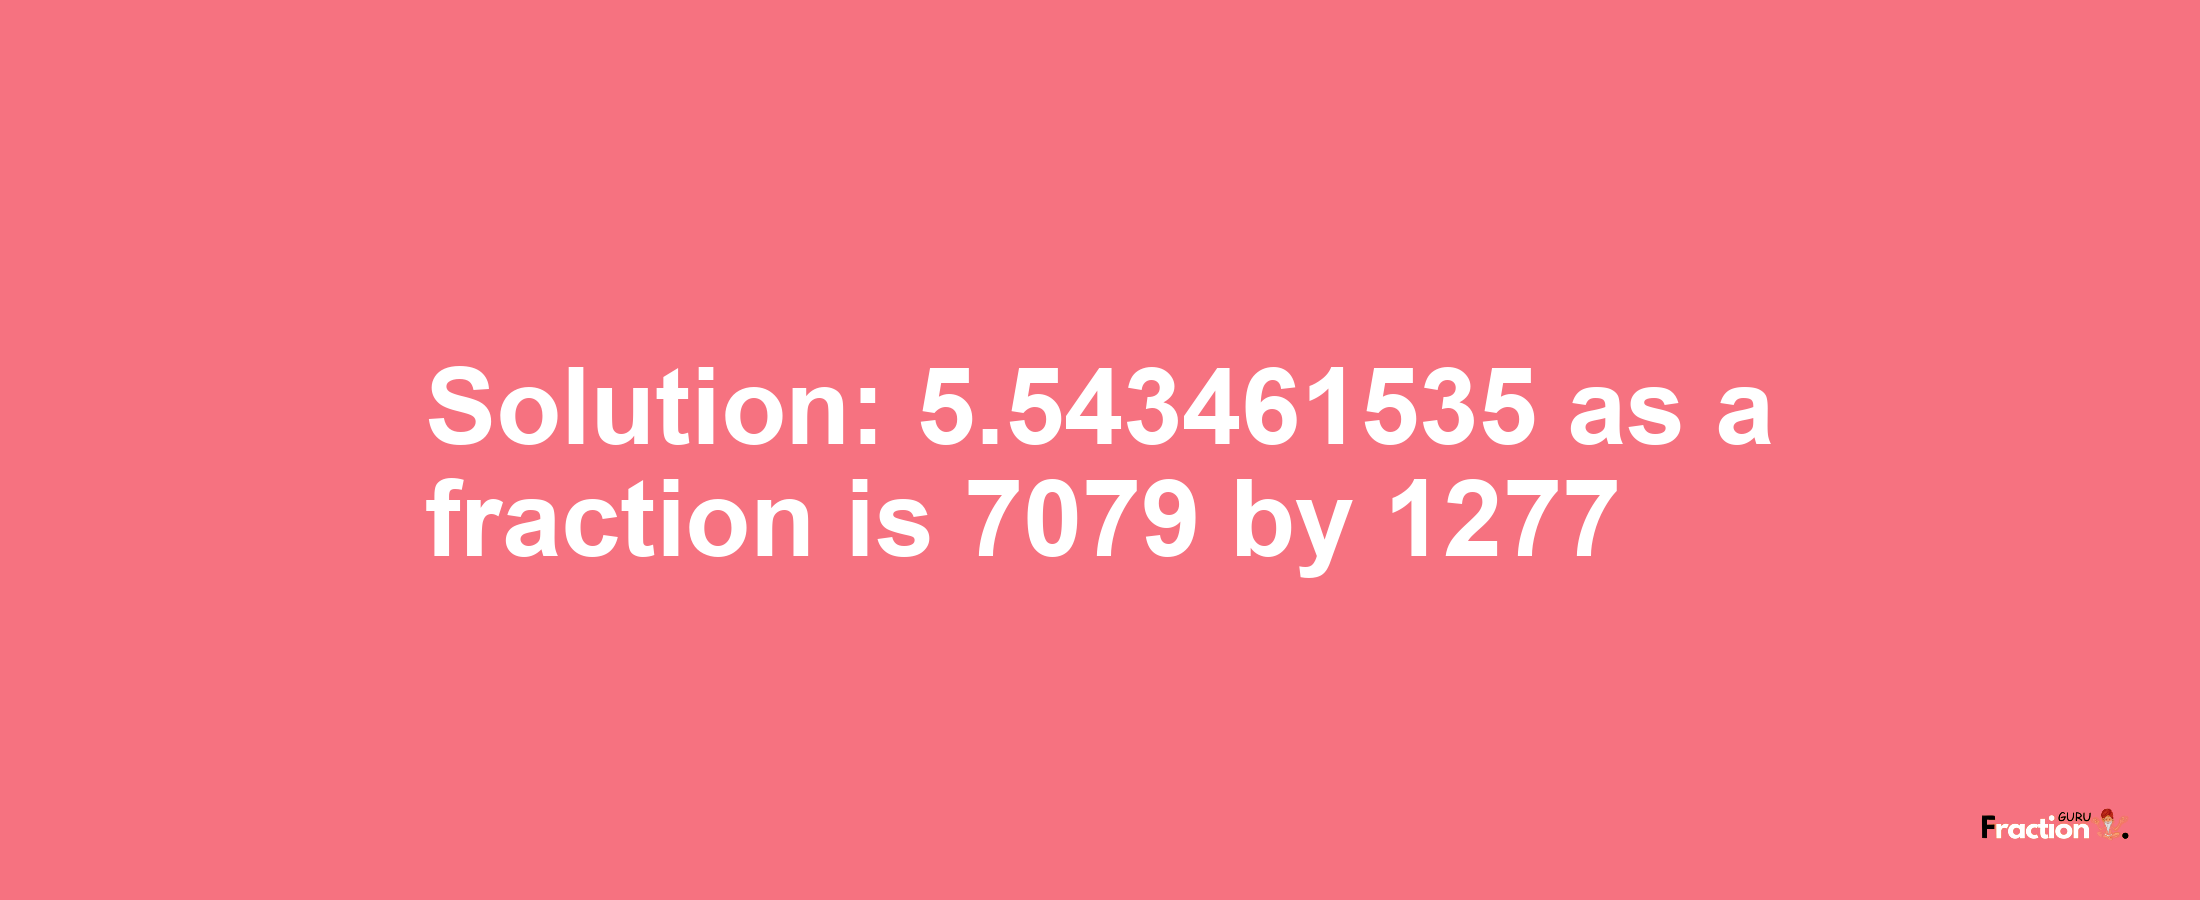 Solution:5.543461535 as a fraction is 7079/1277